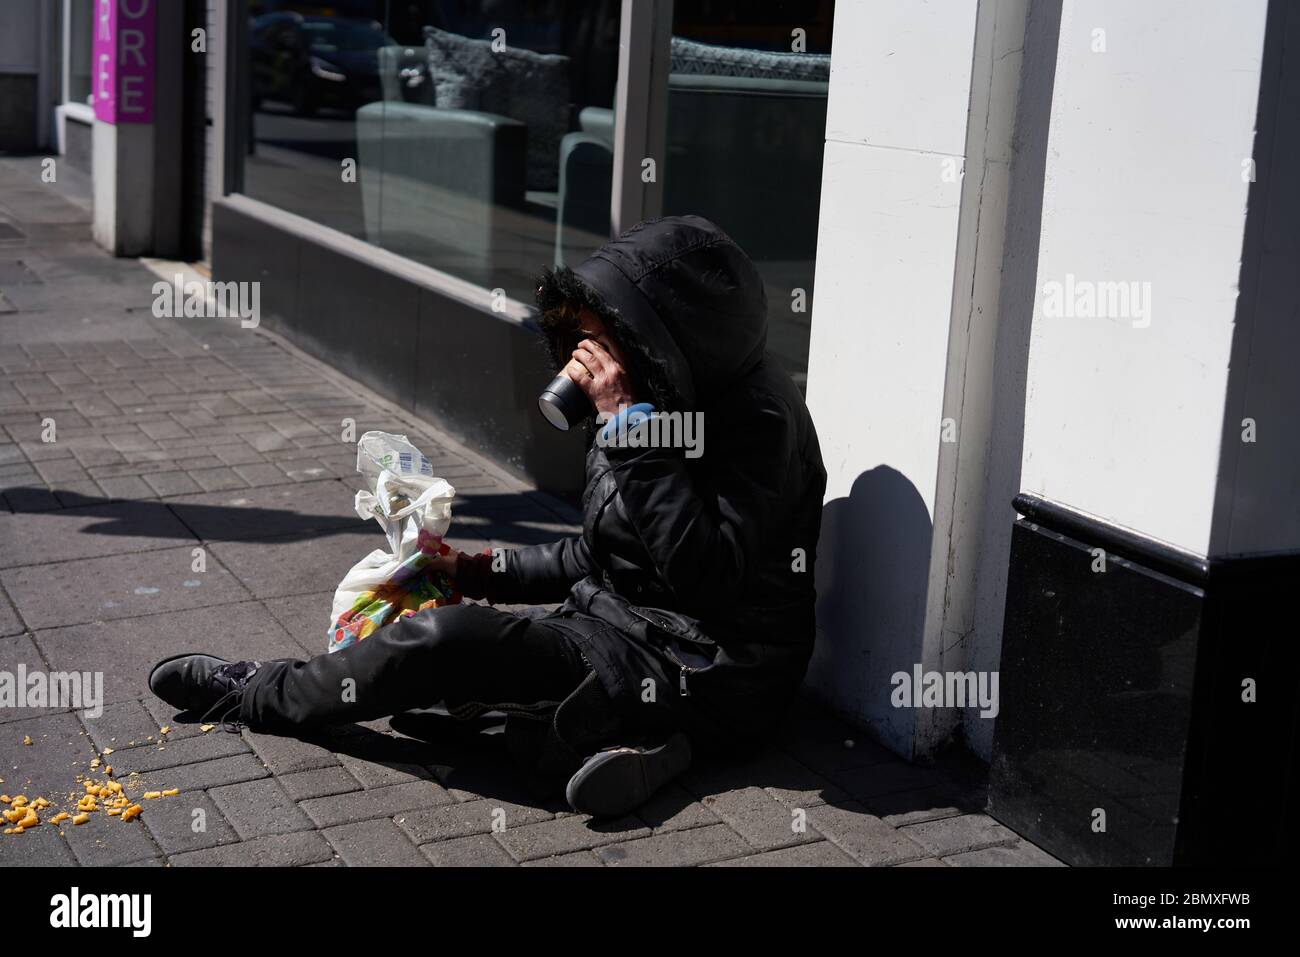 A homeless person sat on the street in Dublin city, Ireland. Stock Photo